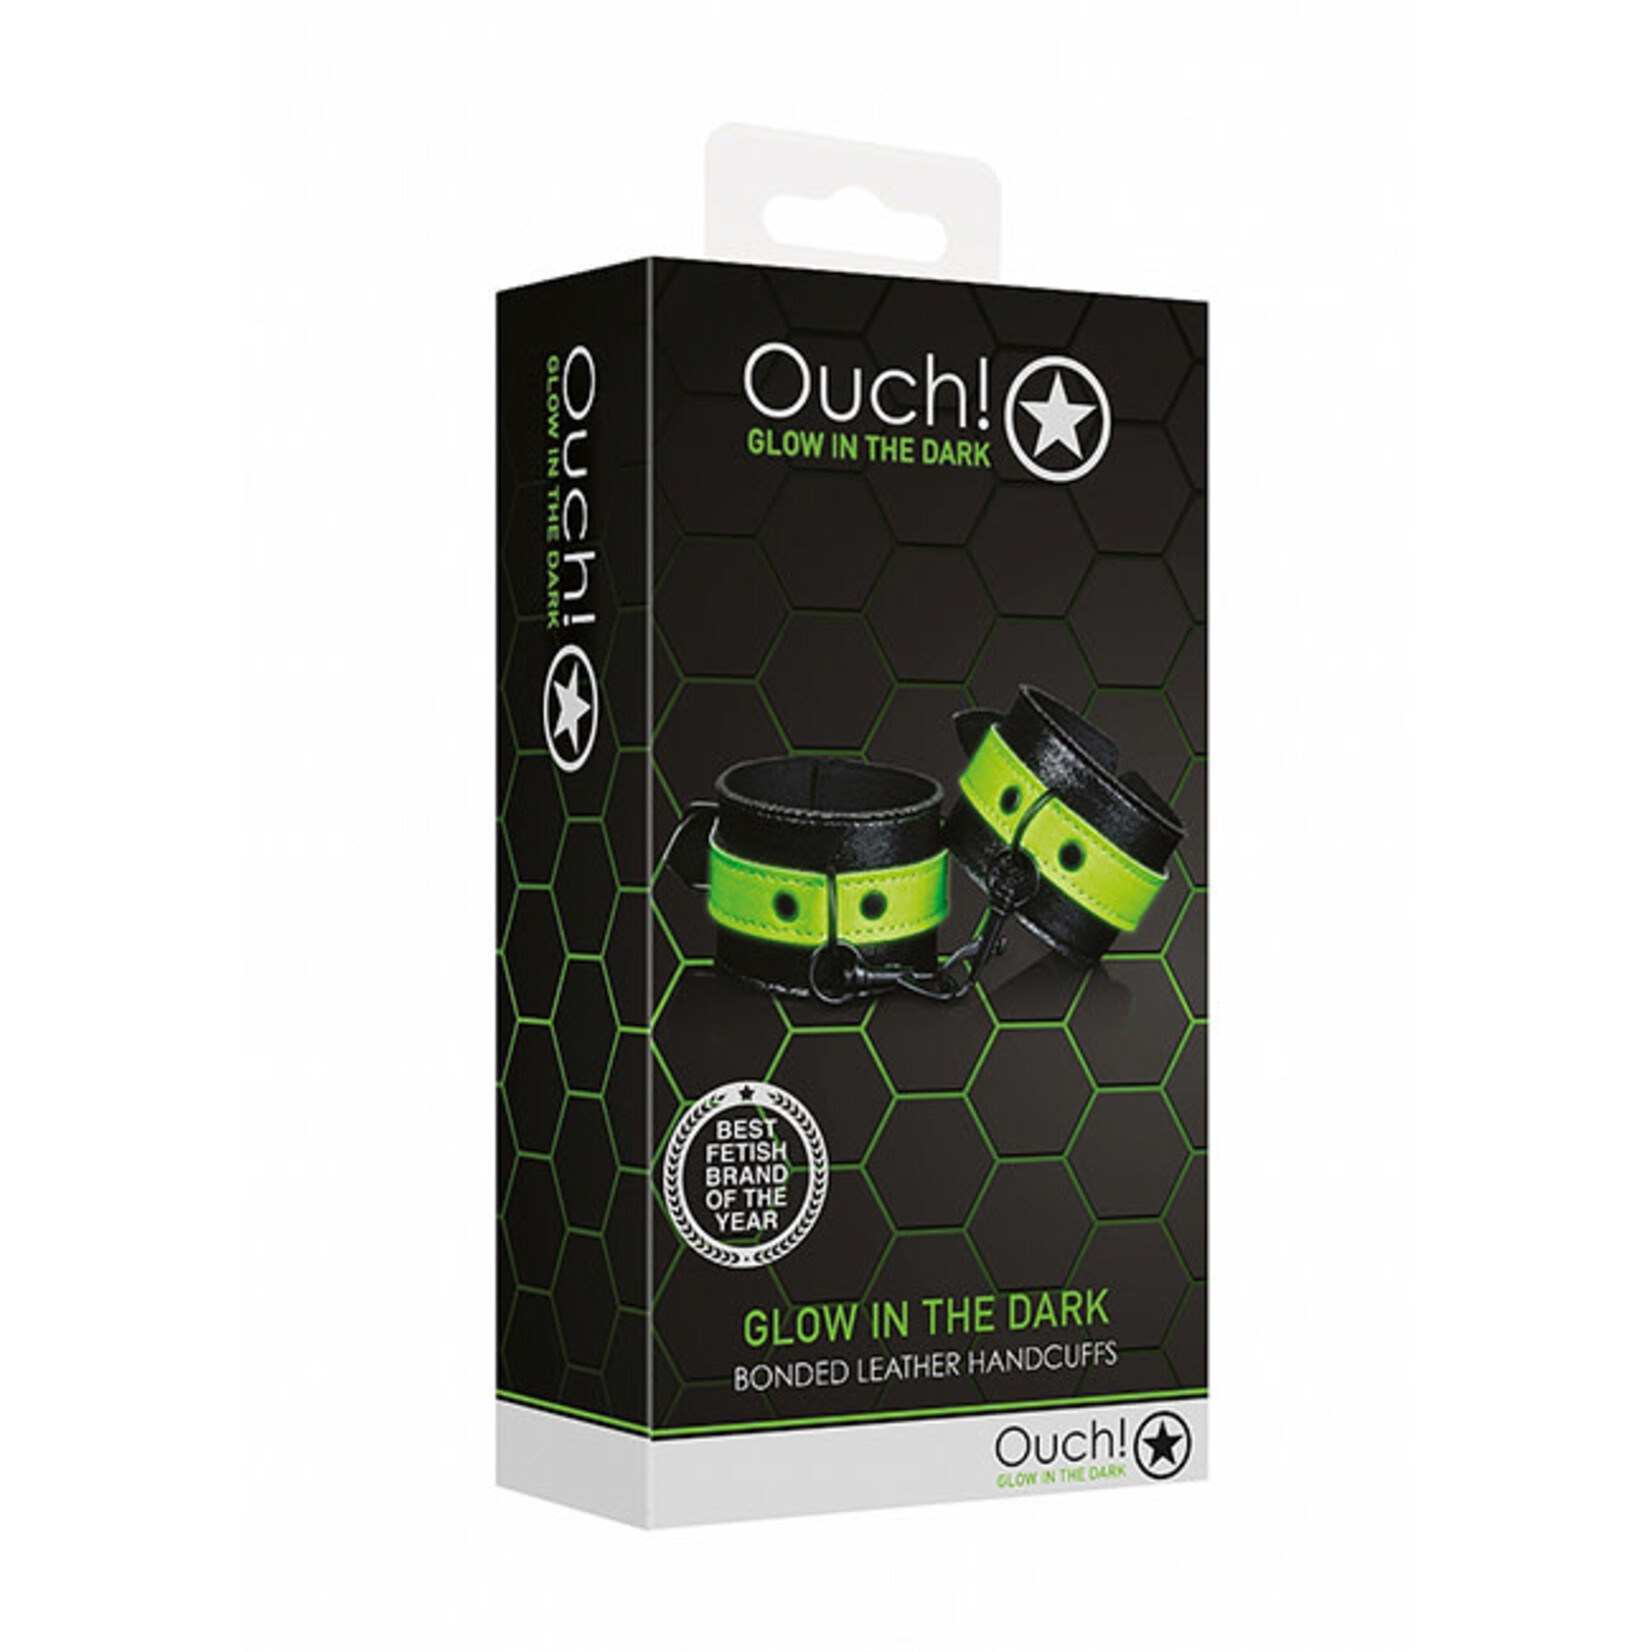 Shots America Ouch! Glow in the Dark Handcuffs